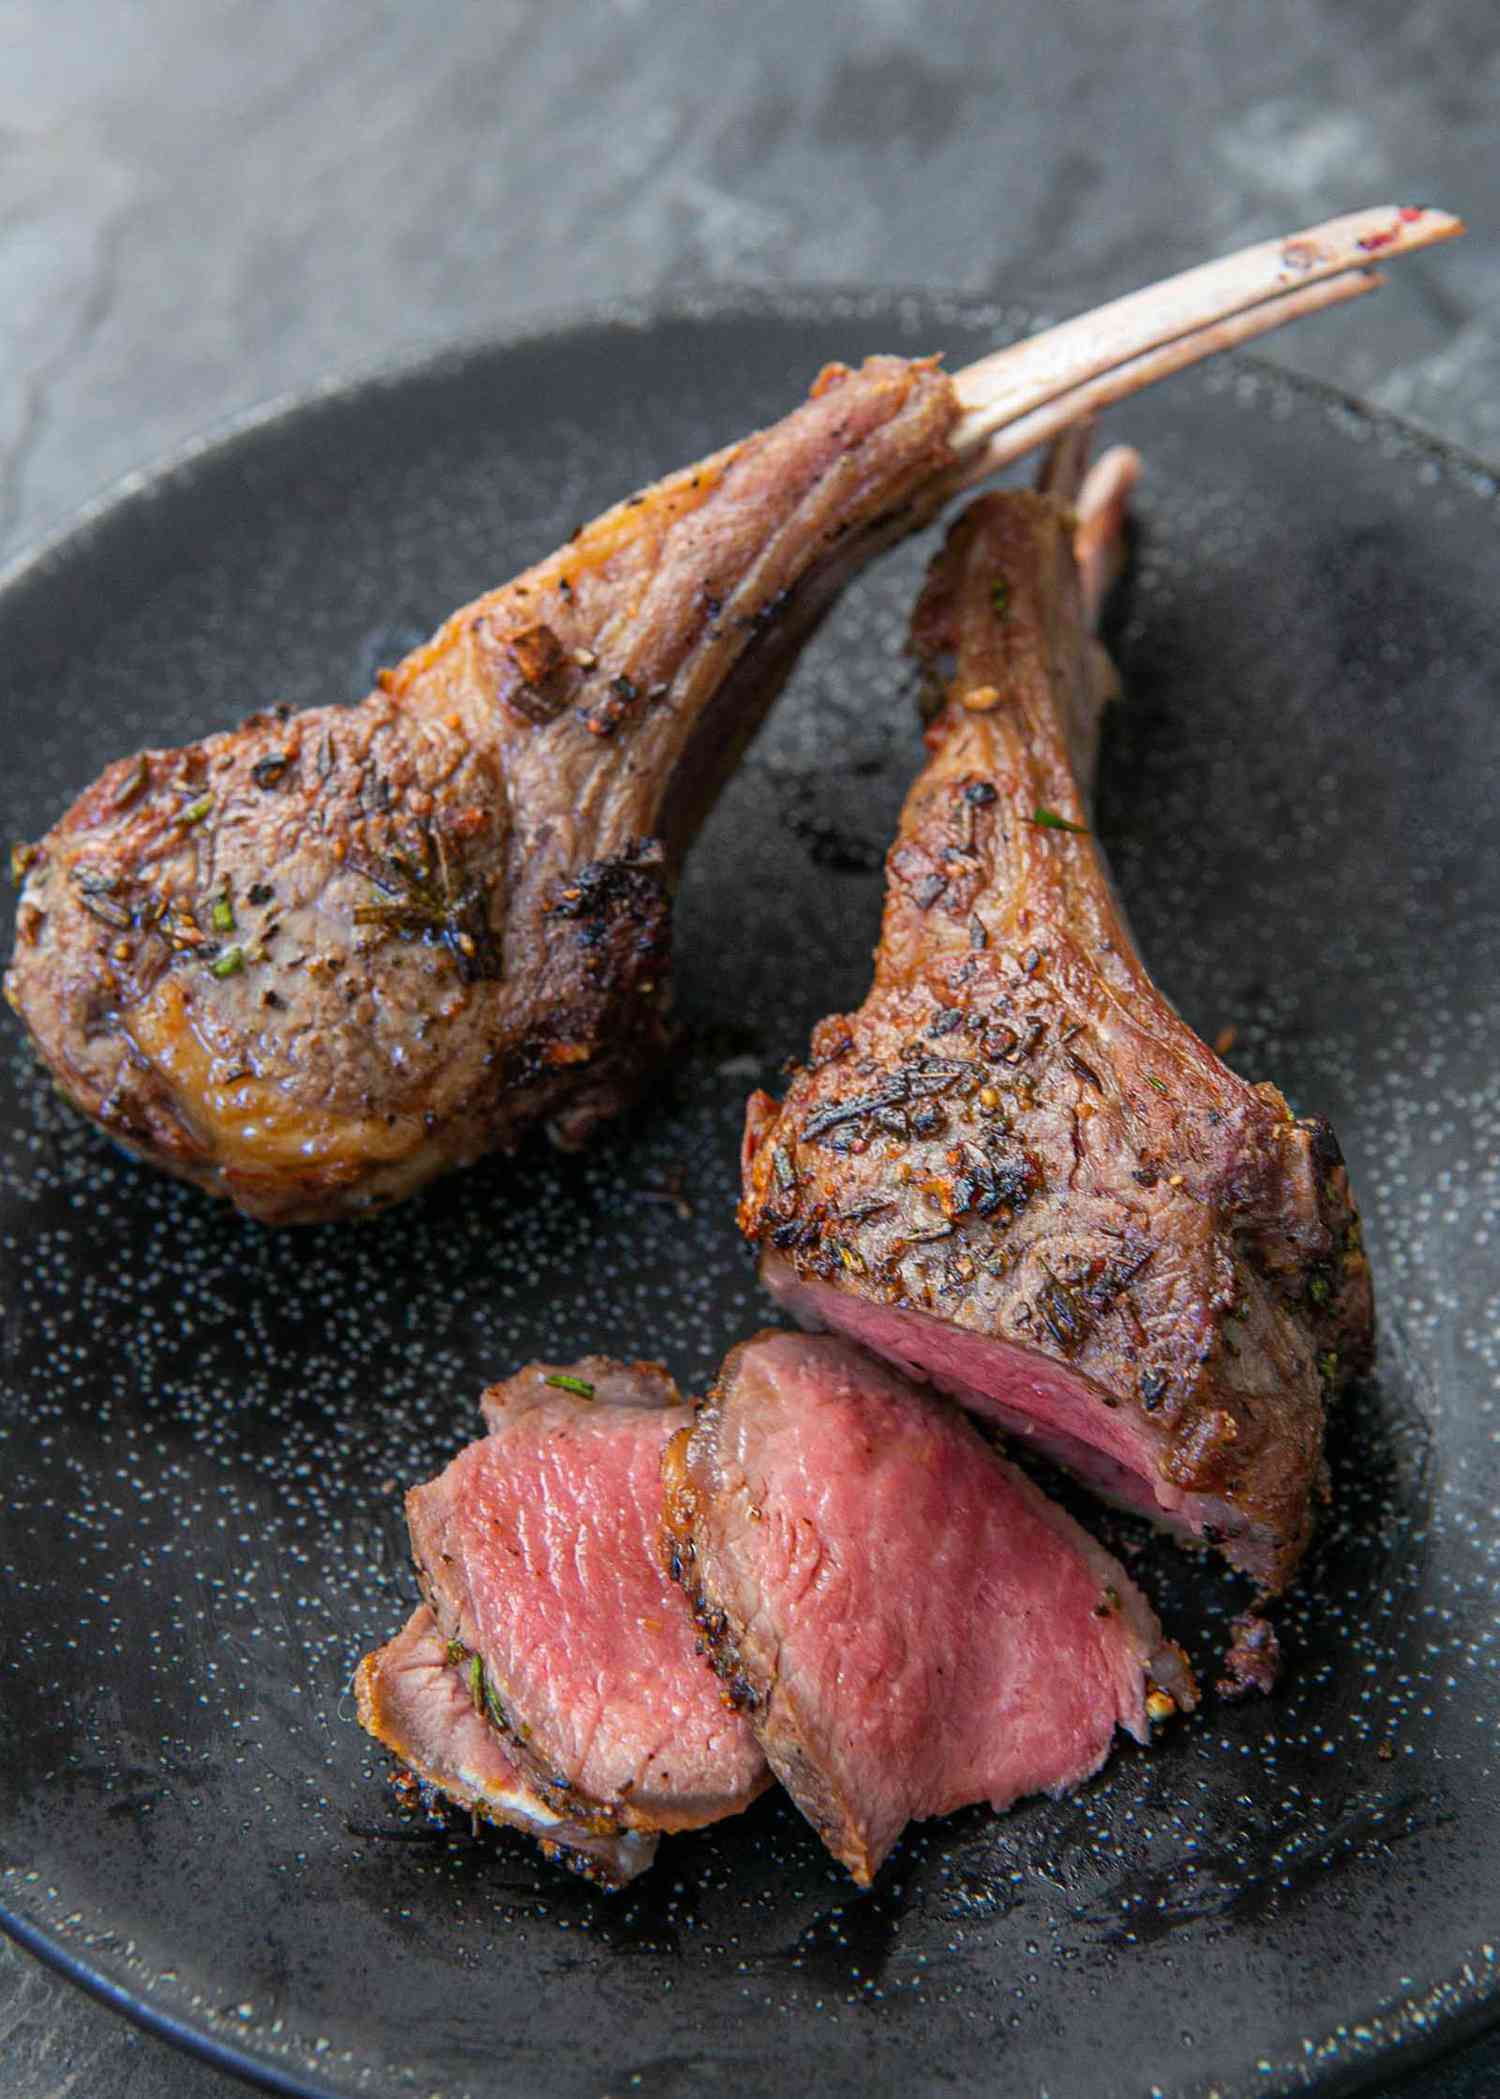 
How Long Does It Take To BBQ Lamb Chops Perfectly
